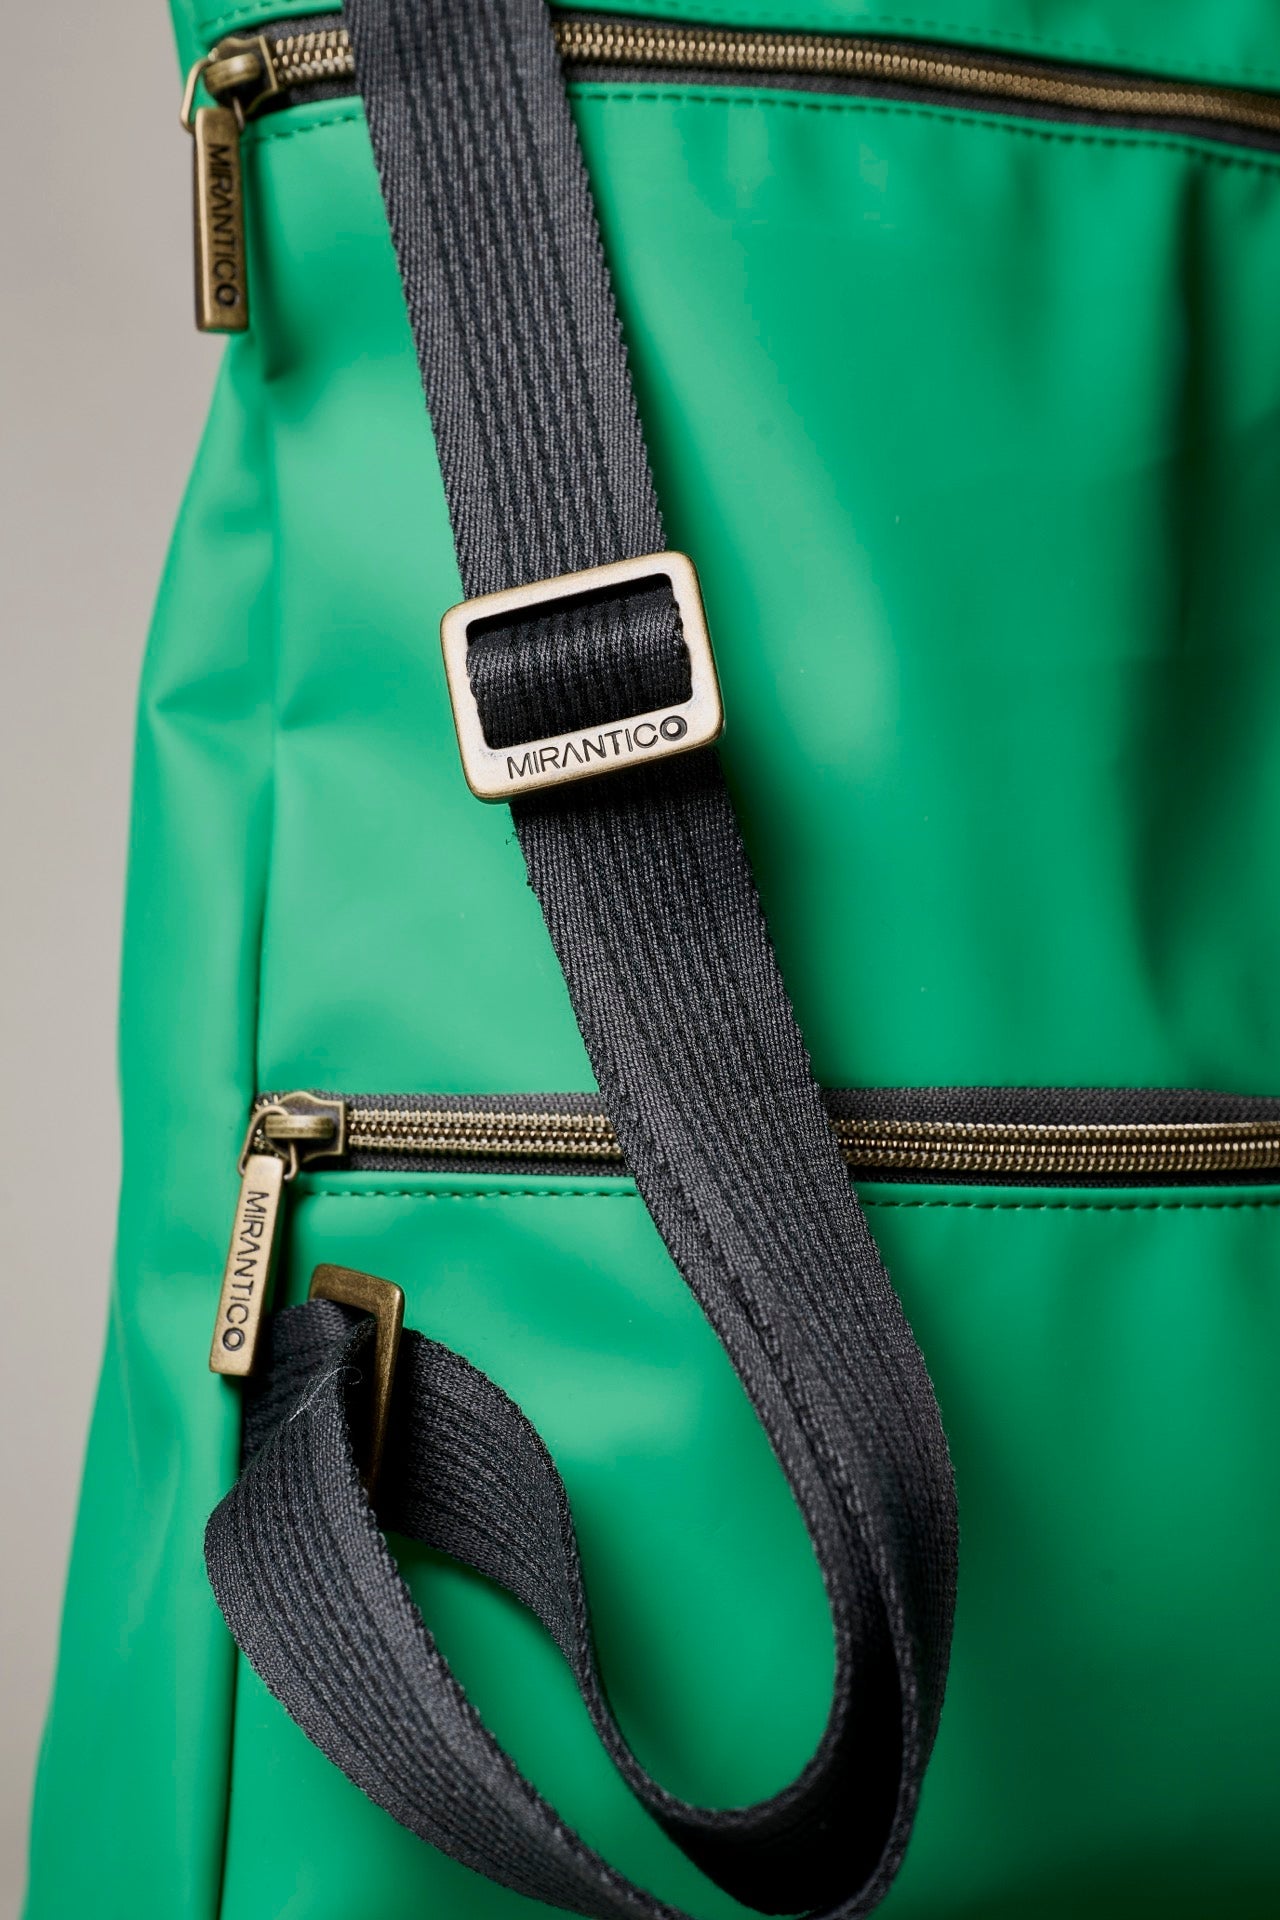 V2 x Mirantico - Green Memo Bag Backpack with Pocket in Optical 3D fabric